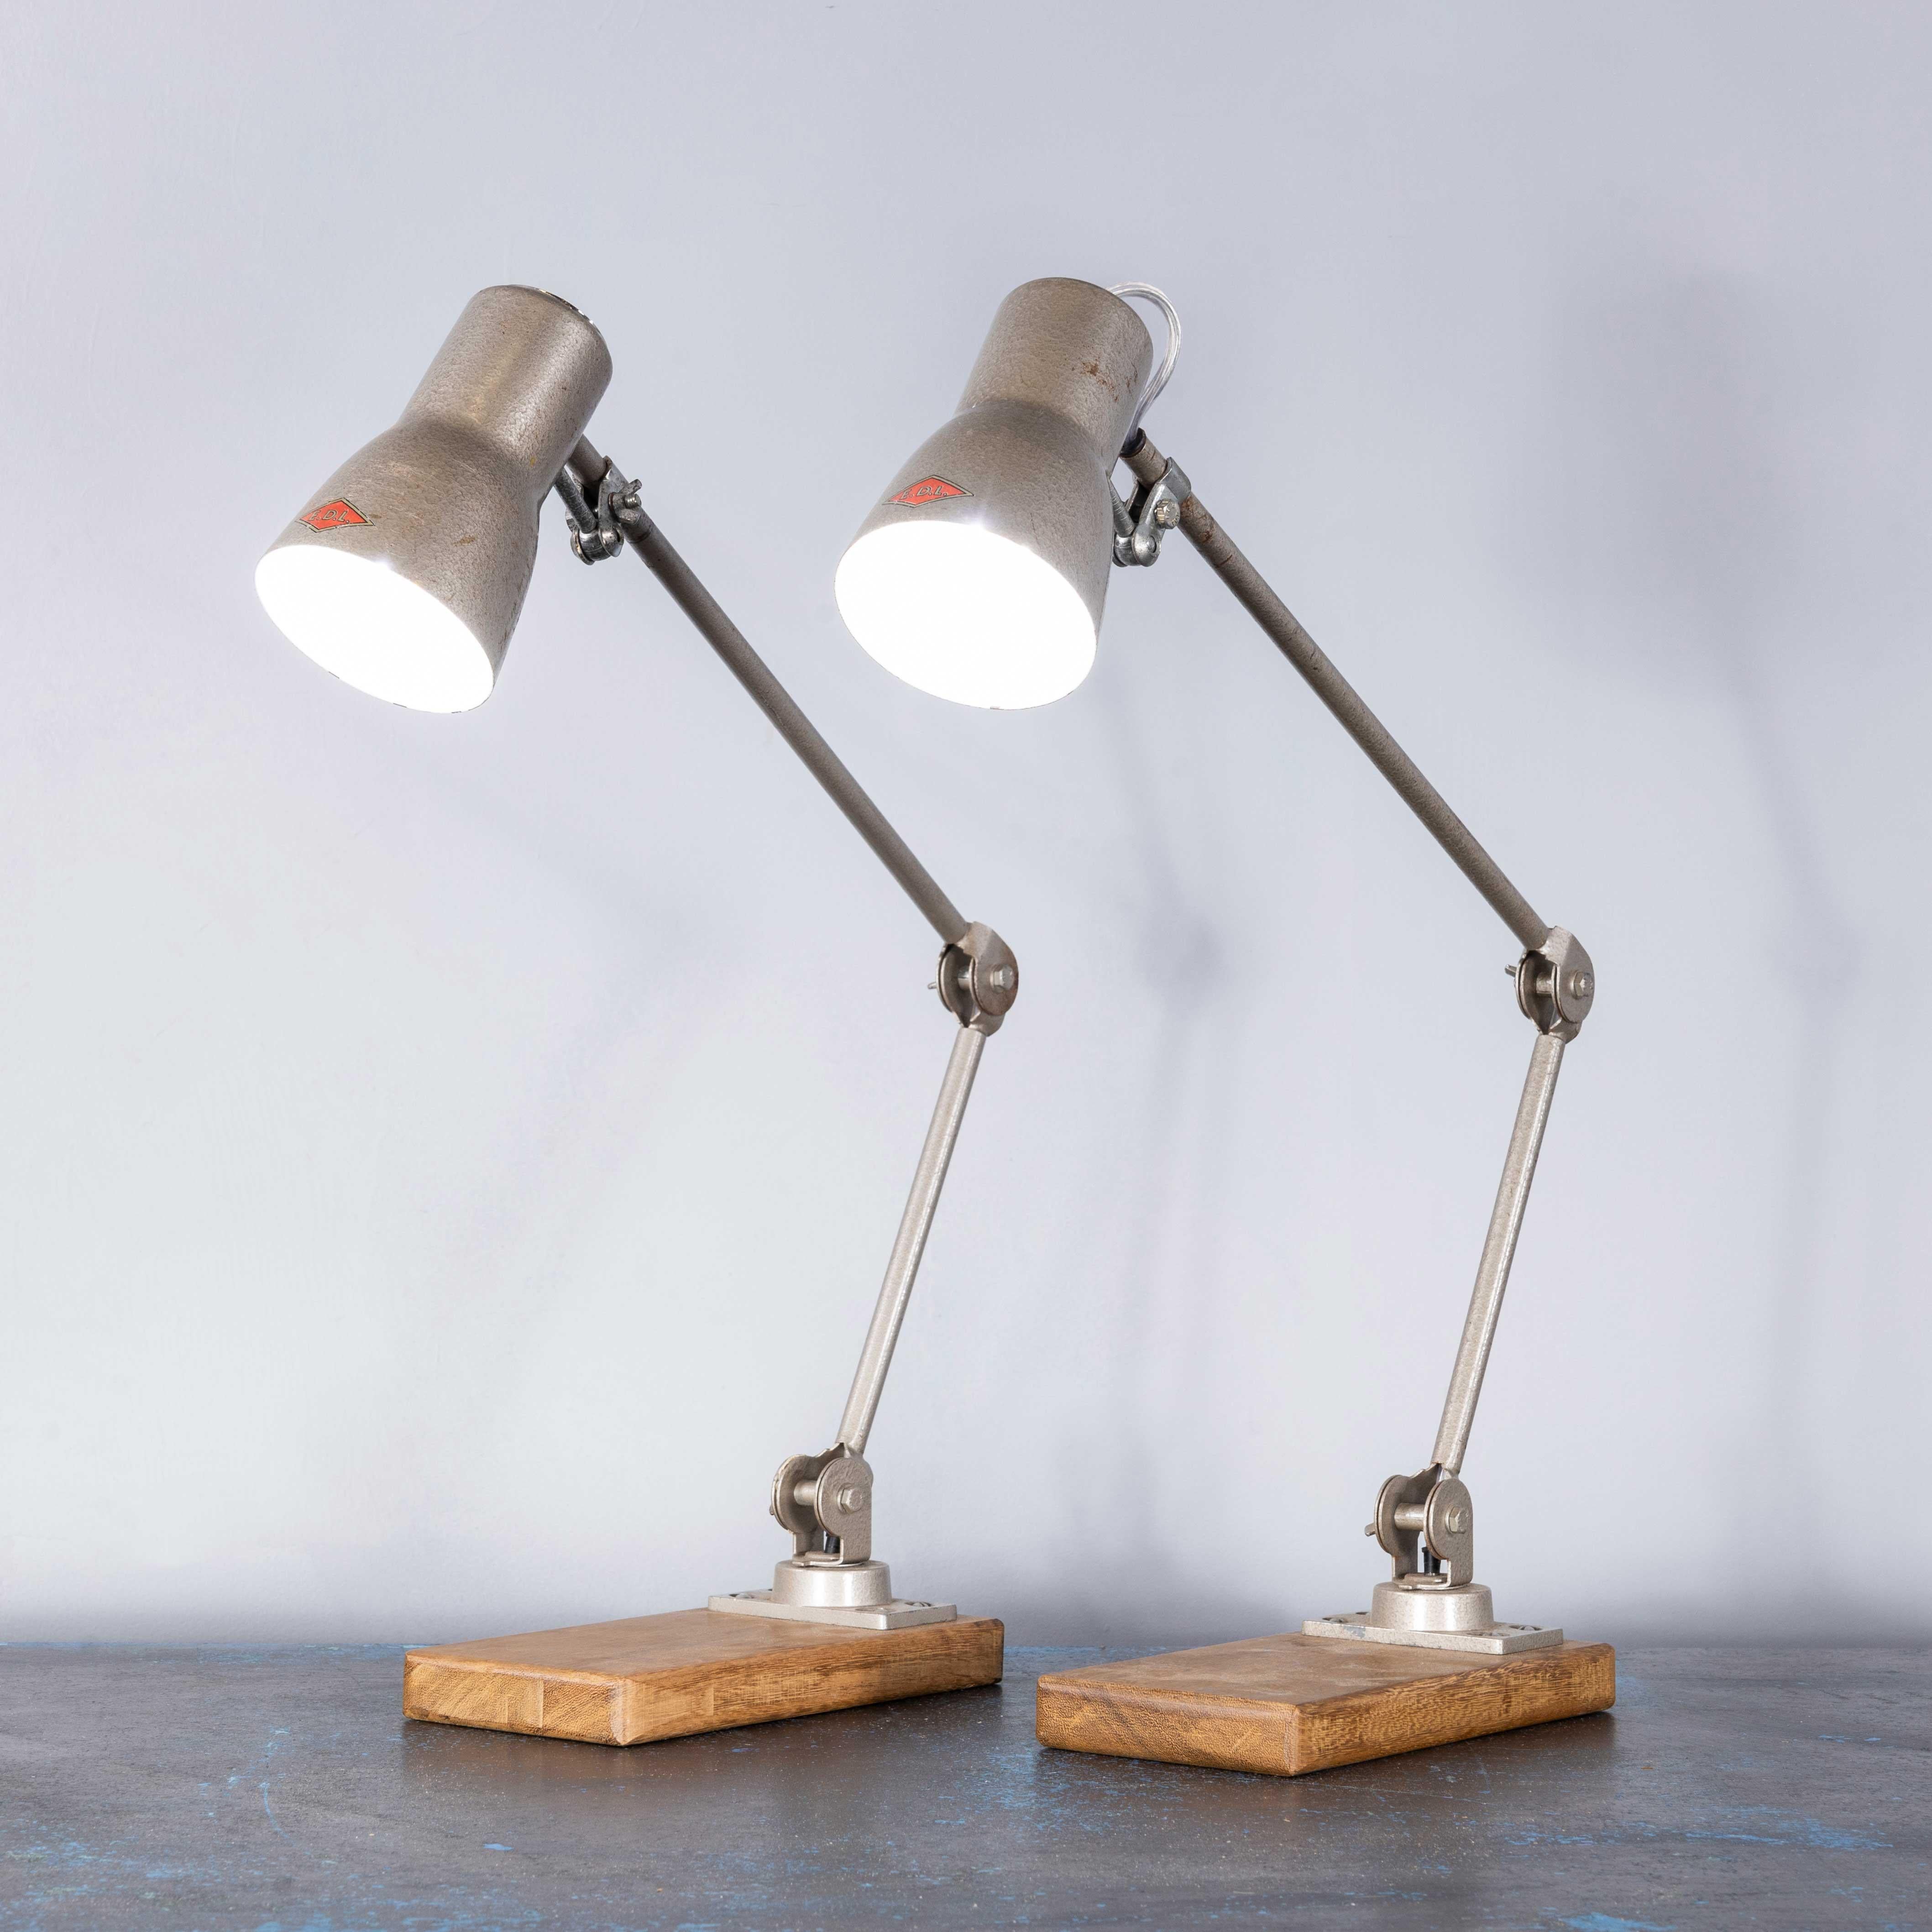 1950's Original Articulated Machinists Desk Lamps By EDL - Pair 5